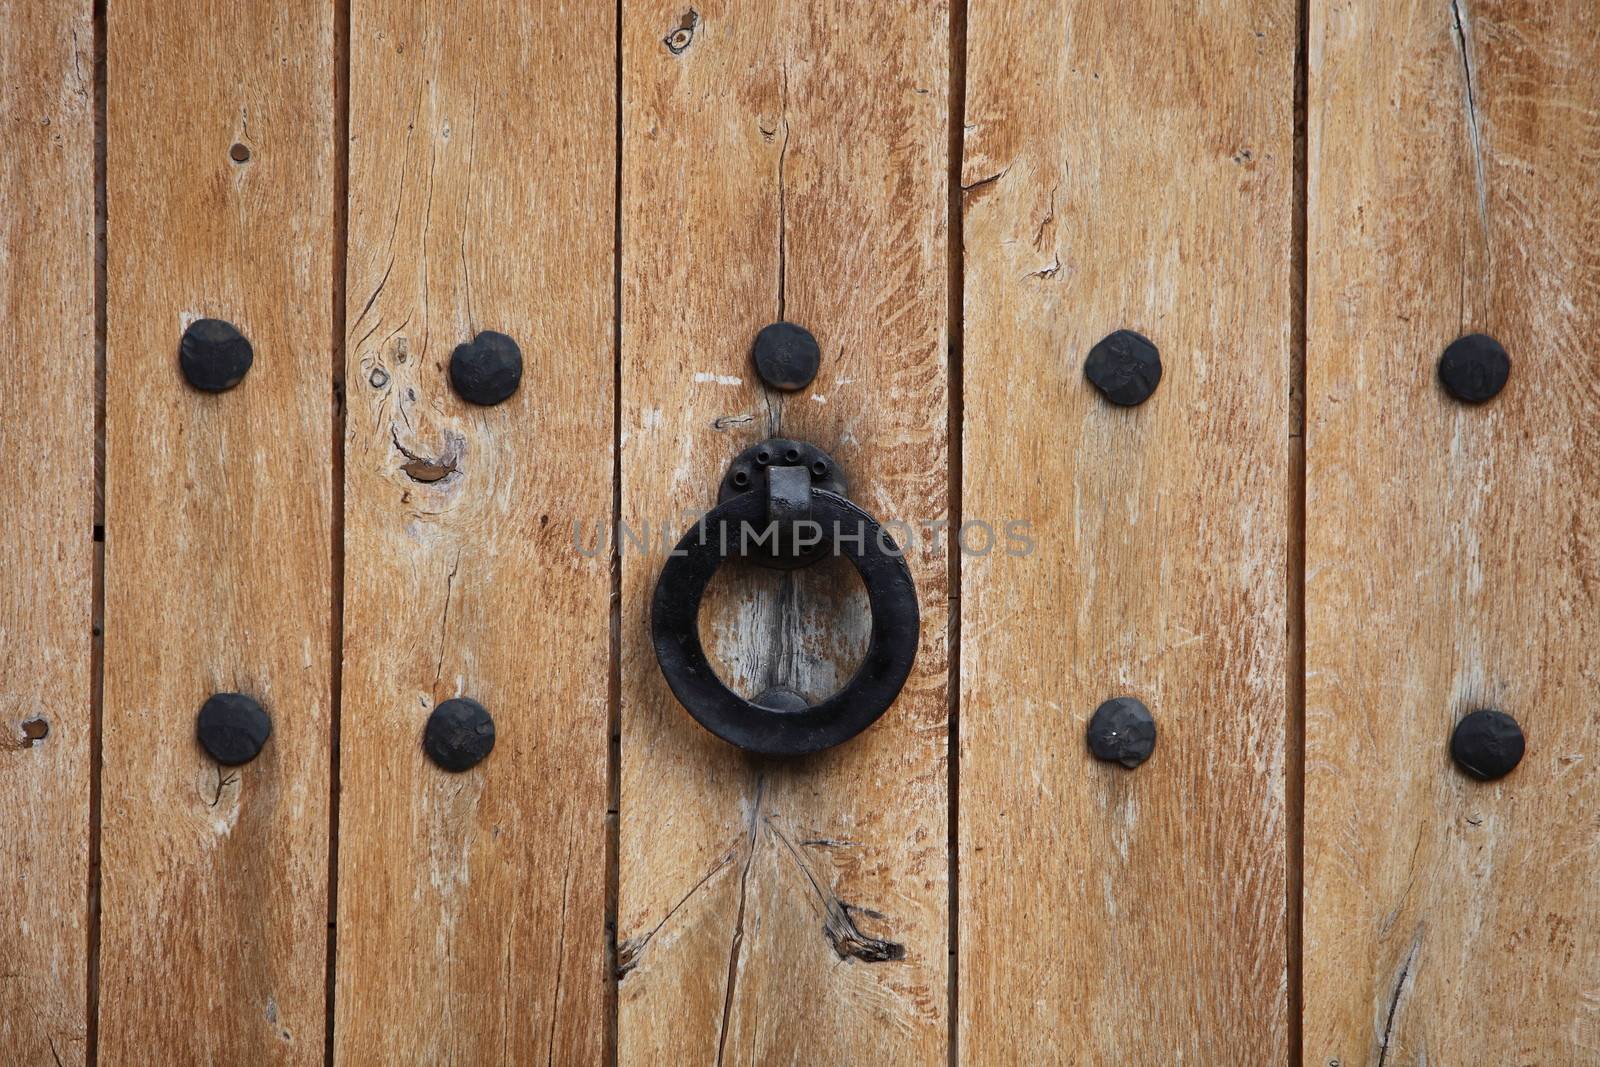 Door handle or knocker in the form of an iron ring on an old wooden door between two rows of studs